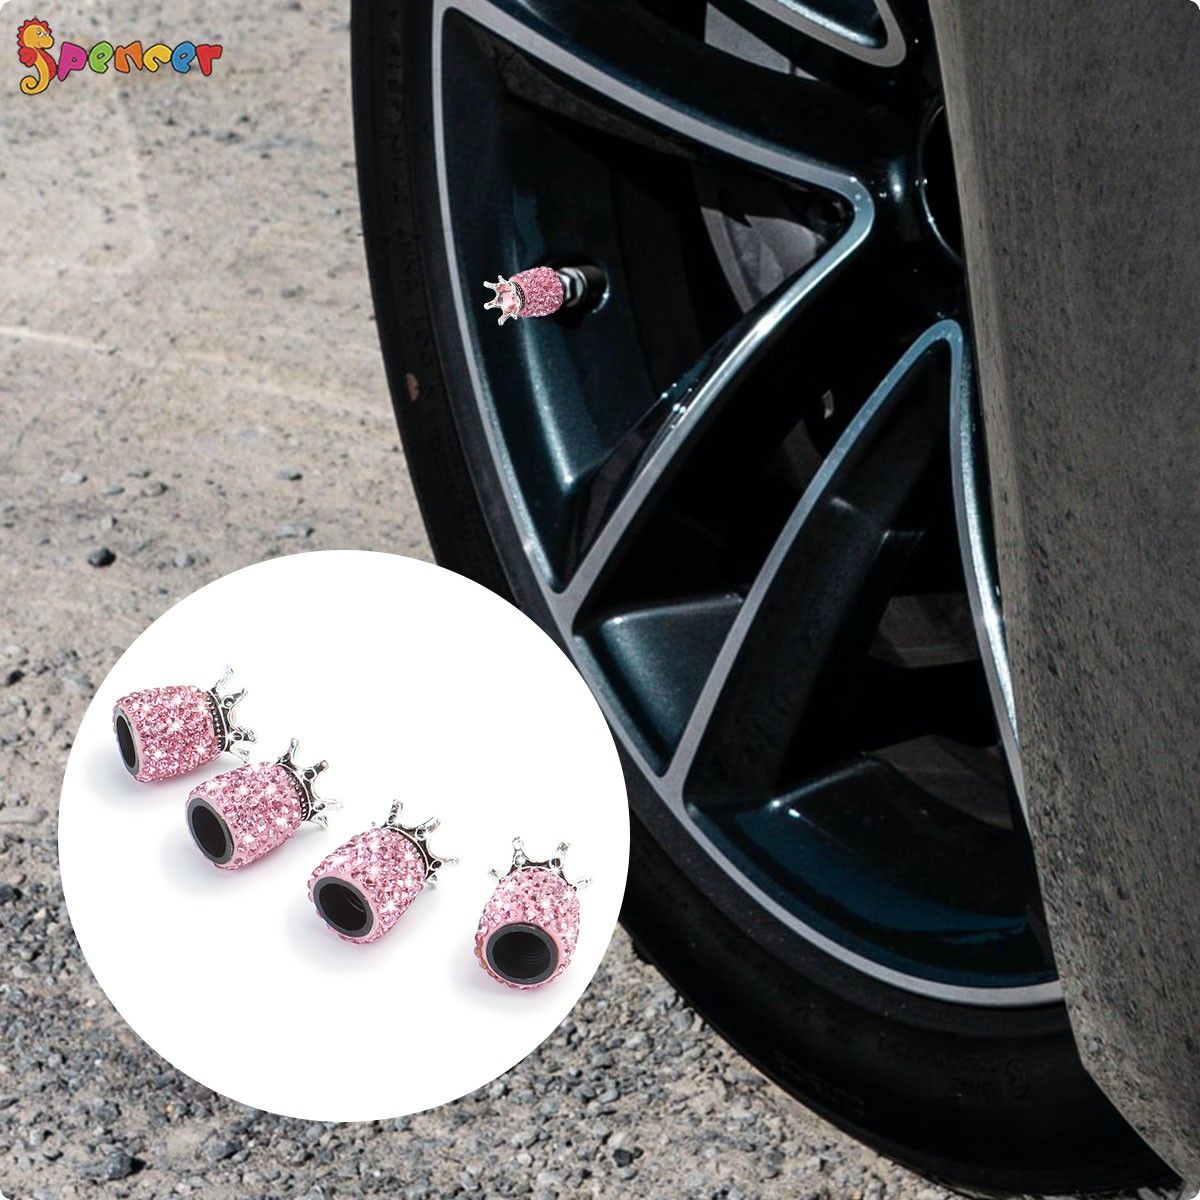 Spencer Pack Rhinestone Crown Valve Stem Caps Handmade Crystal Universal Tire  Valve Dust Caps Bling Car Accessories with 1PC Ring Emblem Sticker for Auto  Ornamen 